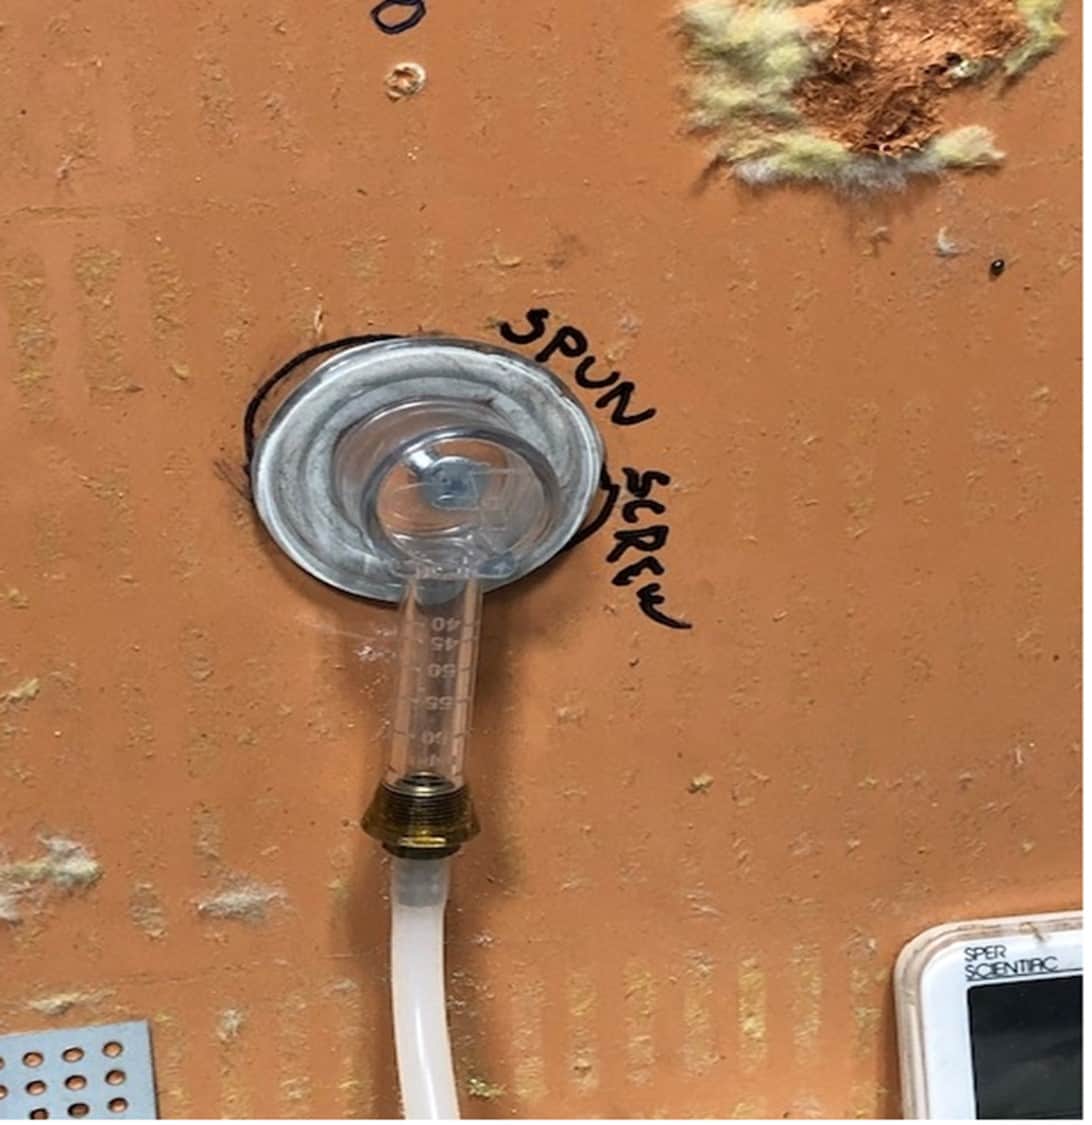 Figure 20.
When the spun fastener was tested for air leakage. One (1) cc of air flowed directly through the opening every second with the fastener still intact. For that reason, we choose to remove the fastener and seal the open hole.
